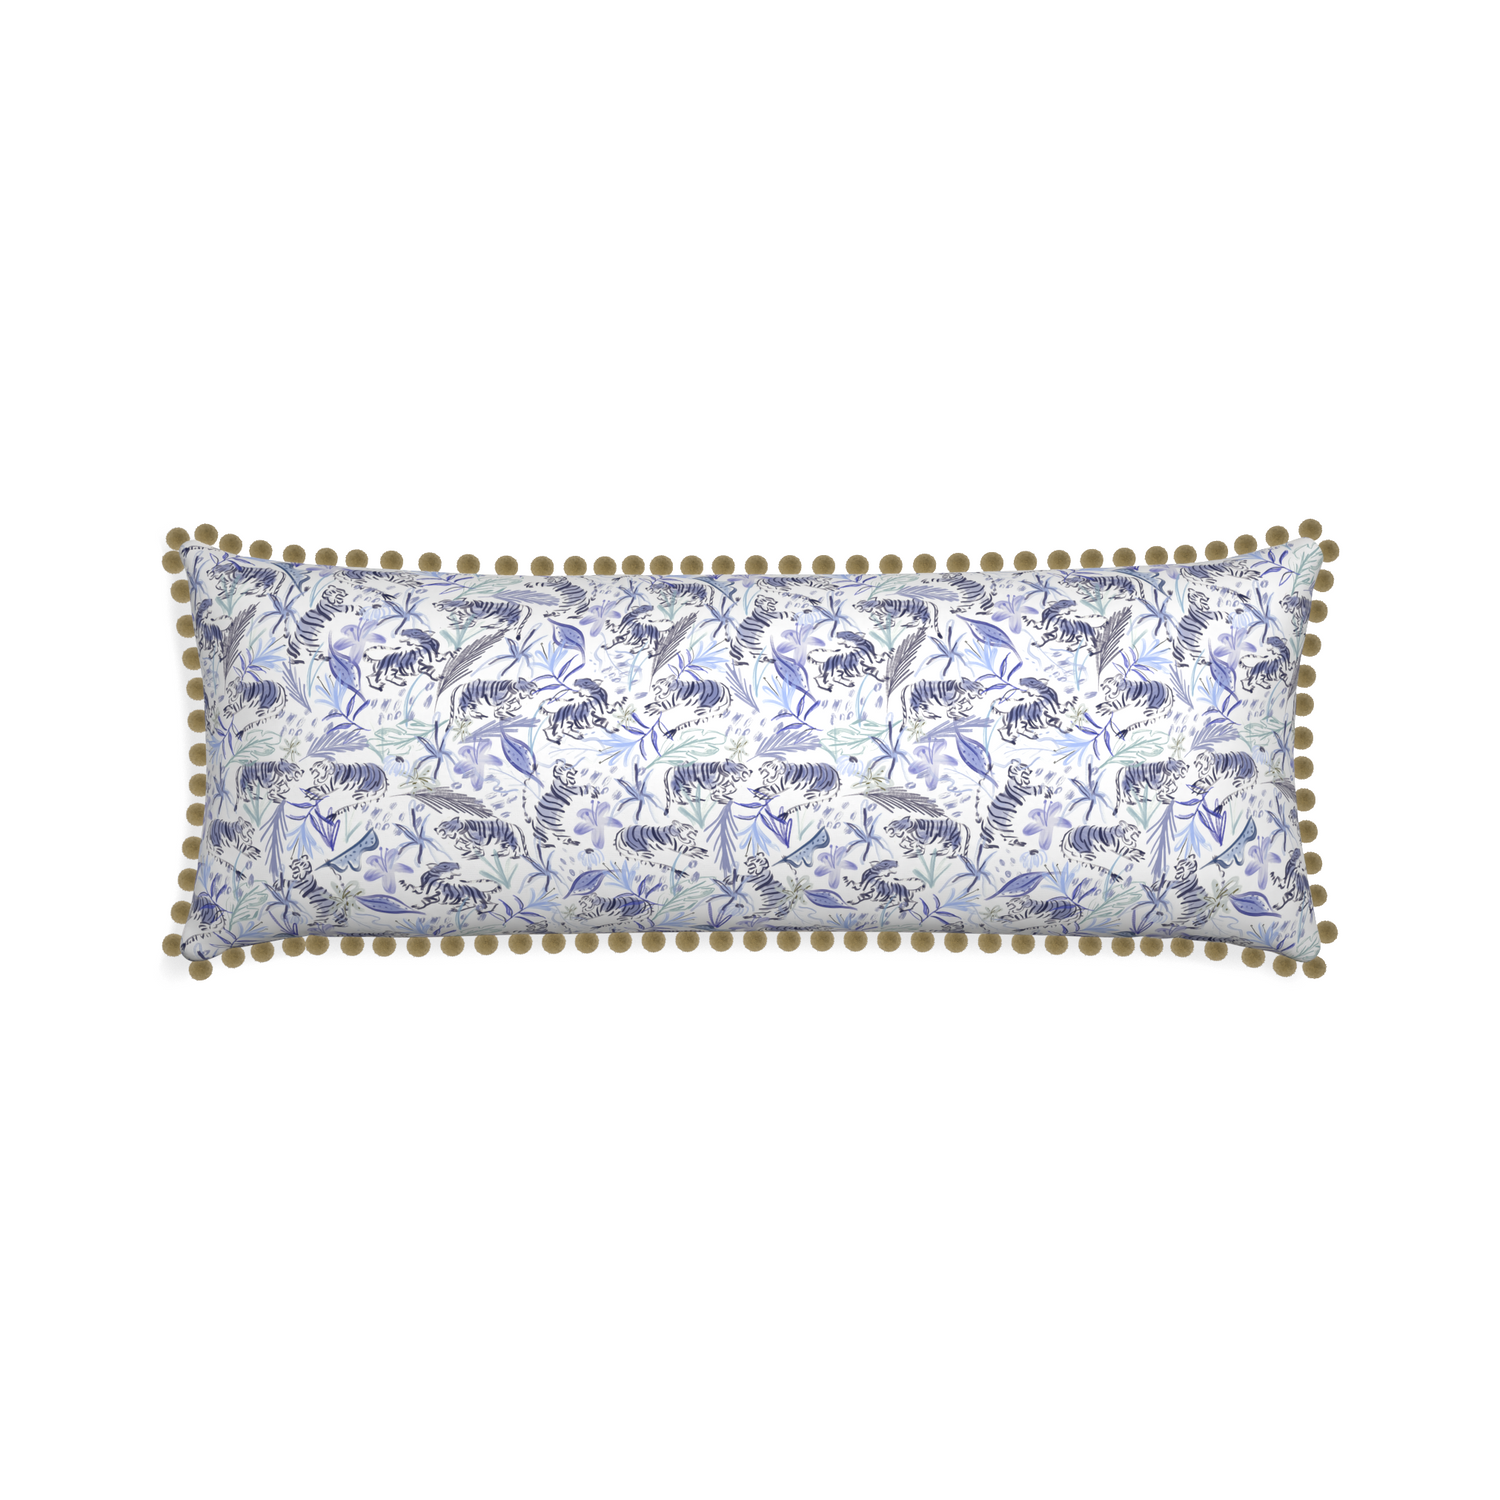 Xl-lumbar frida blue custom blue with intricate tiger designpillow with olive pom pom on white background